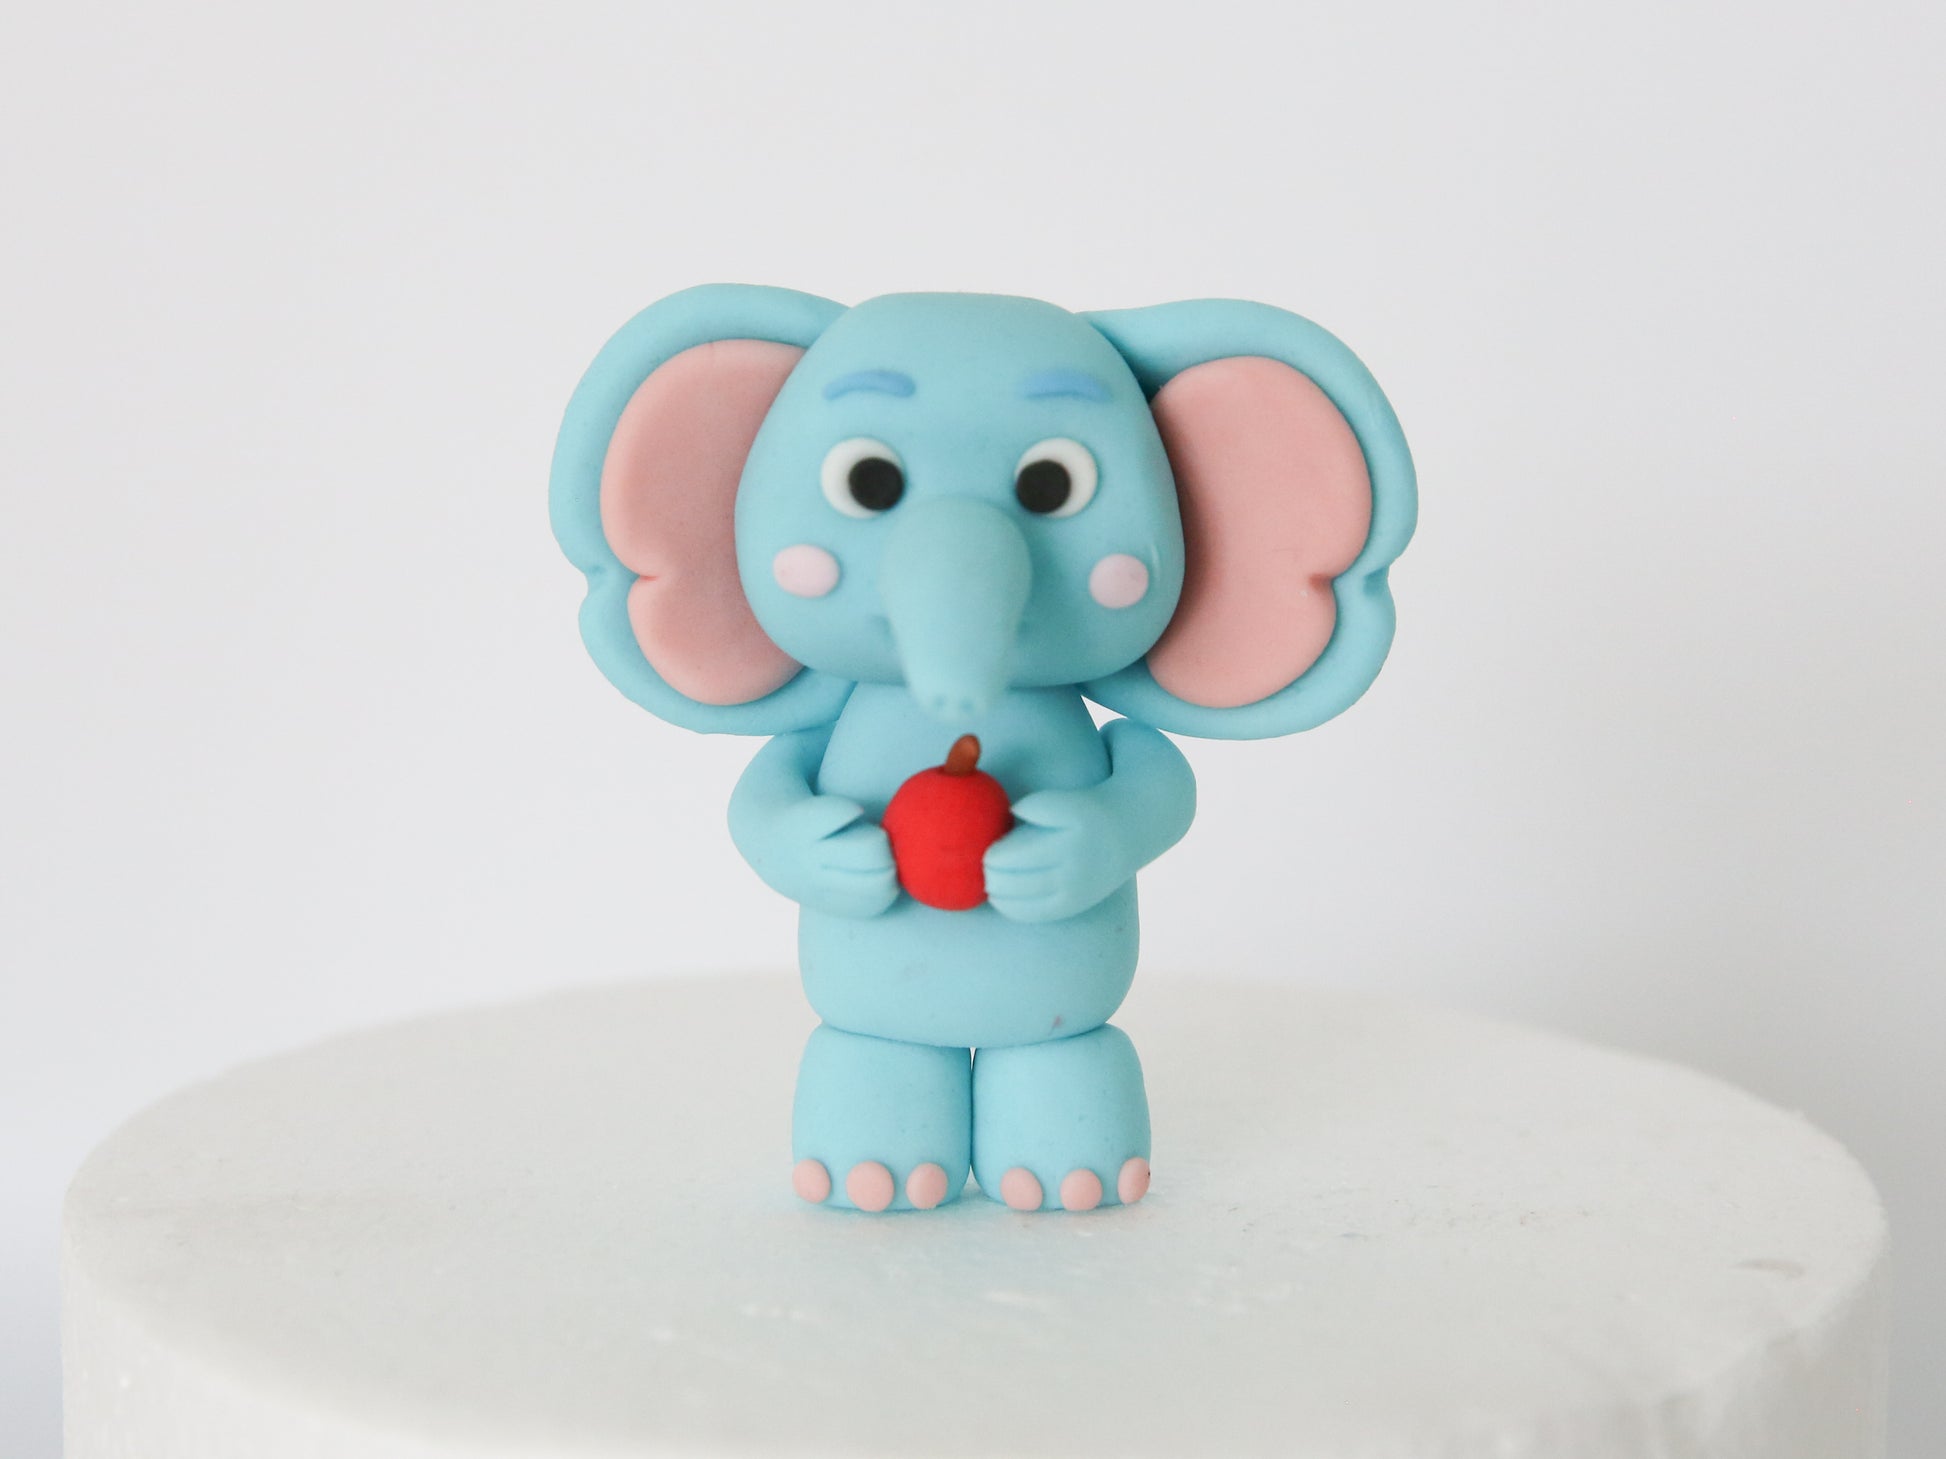 Cartoon Character Stitch and Angel Inspired Cake Topper